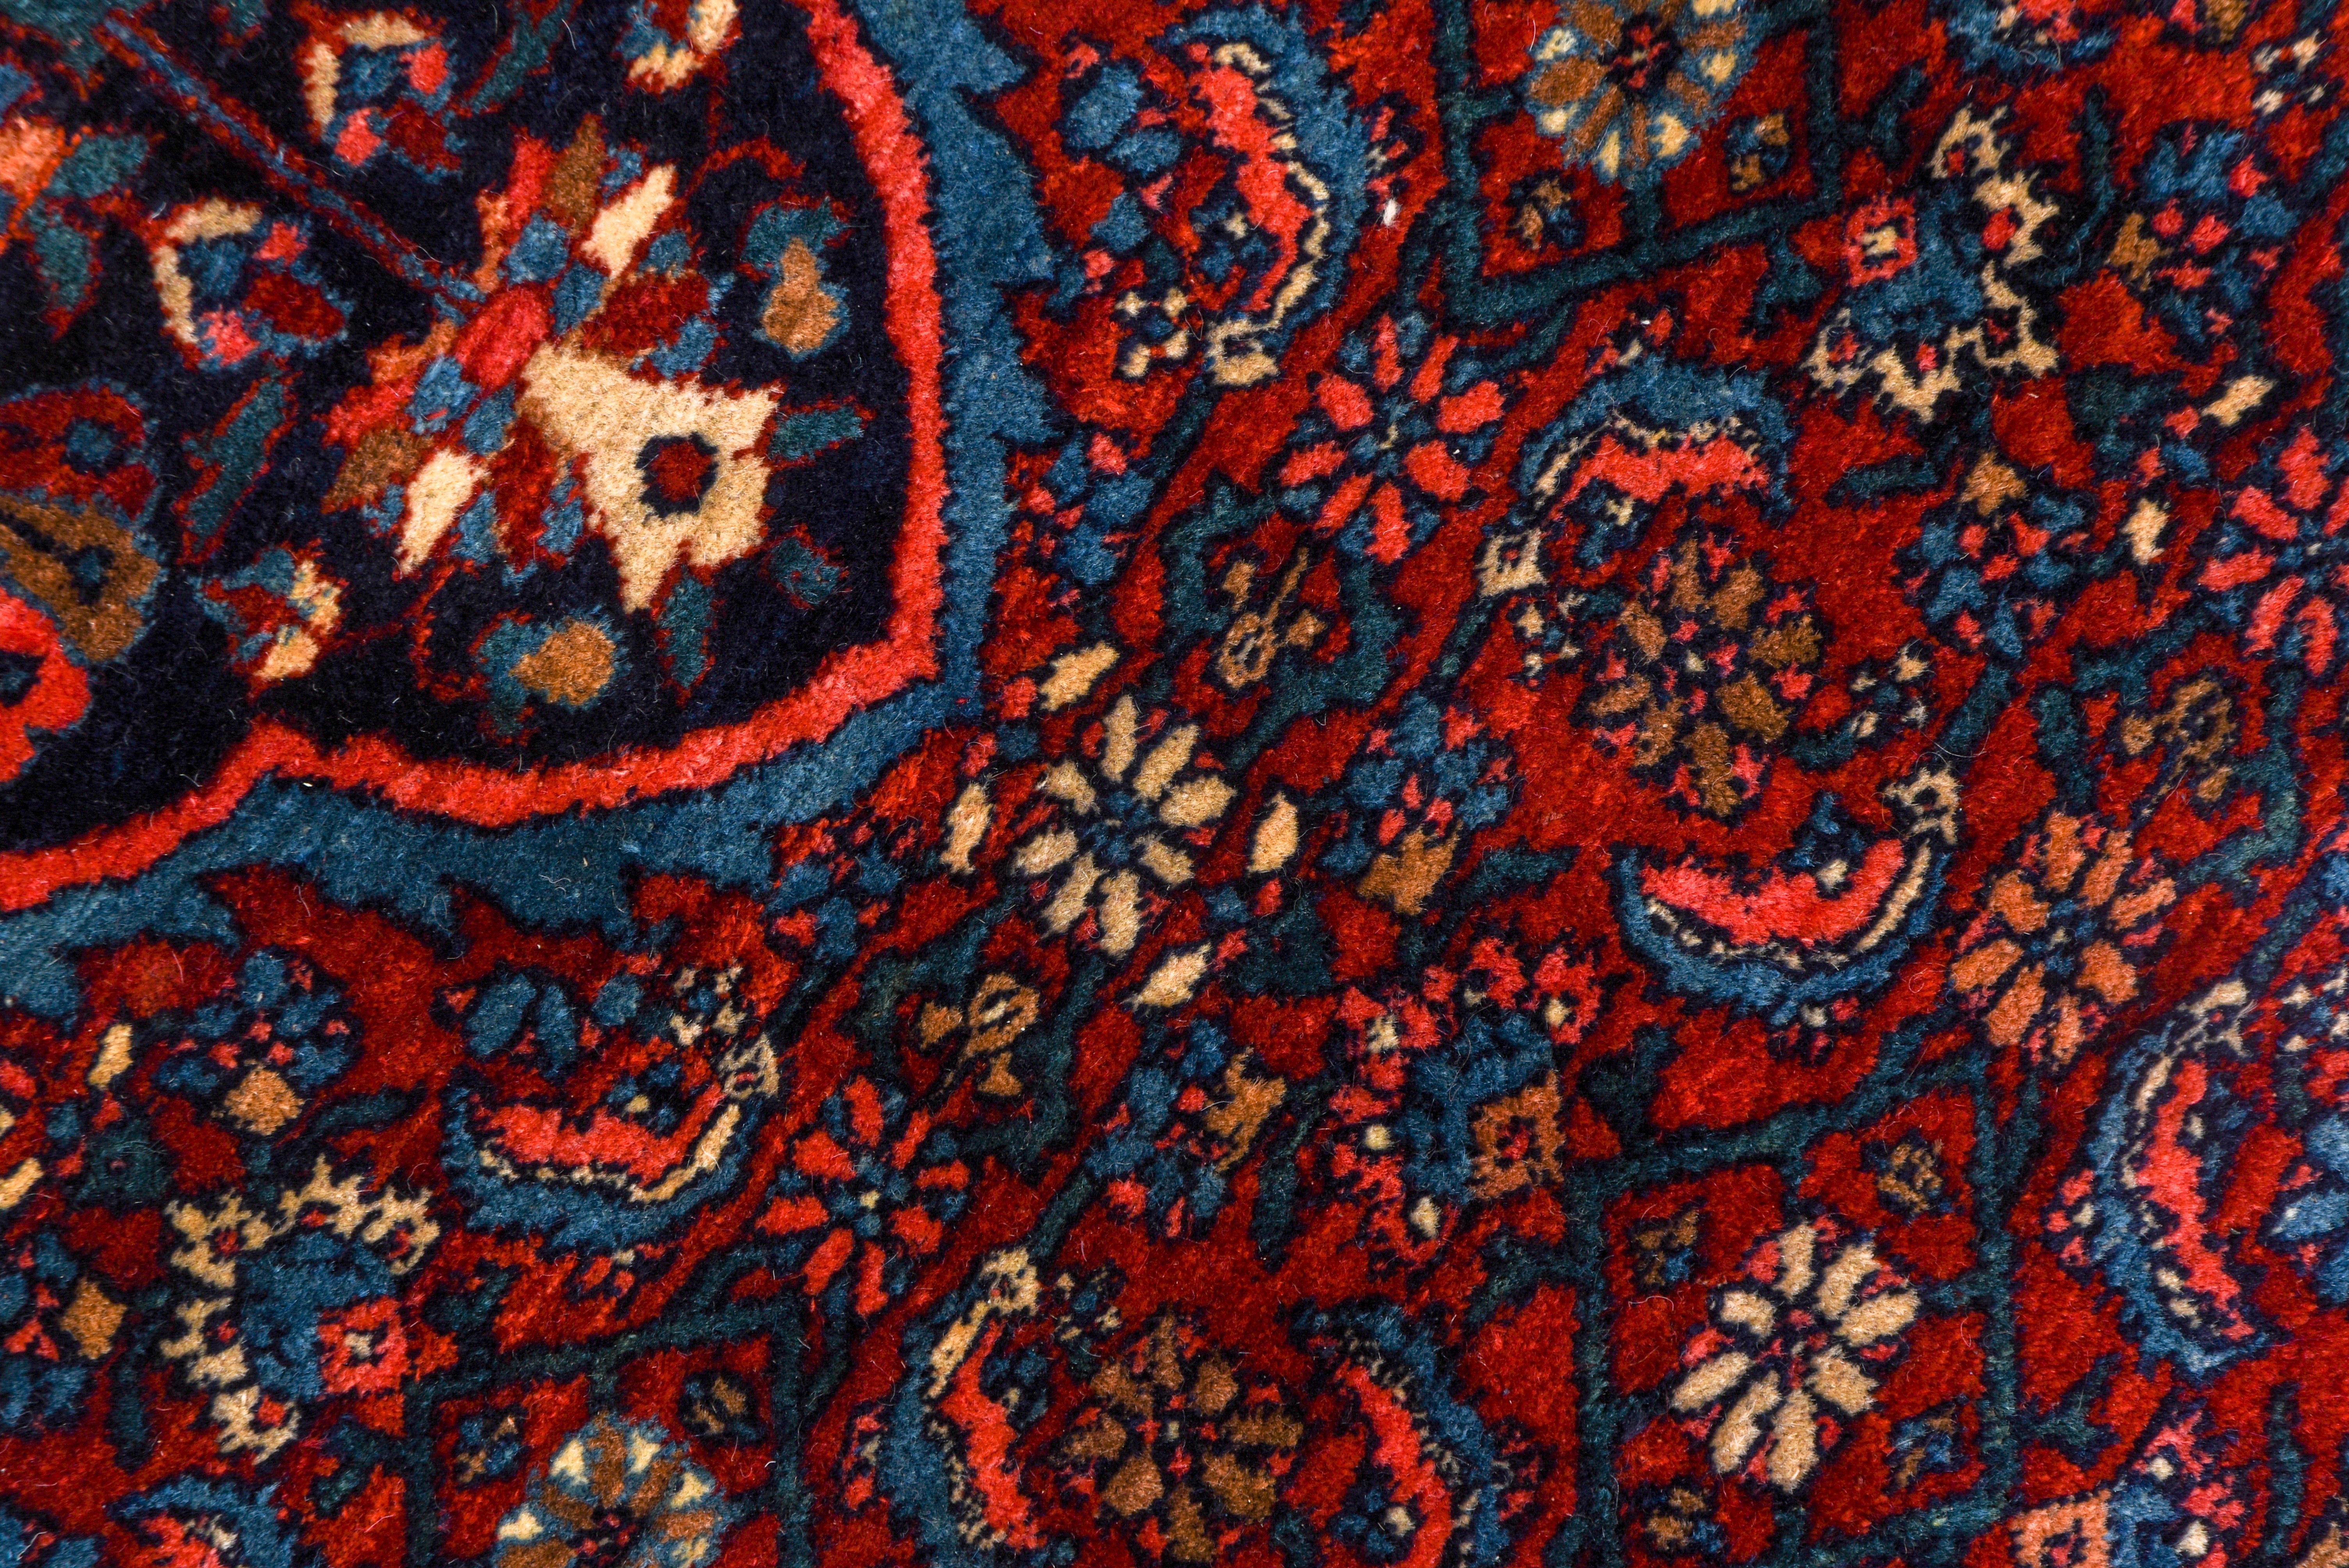 This west Persian Kurdish town carpet has an all Herati field pattern: the red ground and the pendanted navy medallion and the triangular navy corners all share a Classic small rosette, leaf and open diamond pattern. The precisely rendered navy